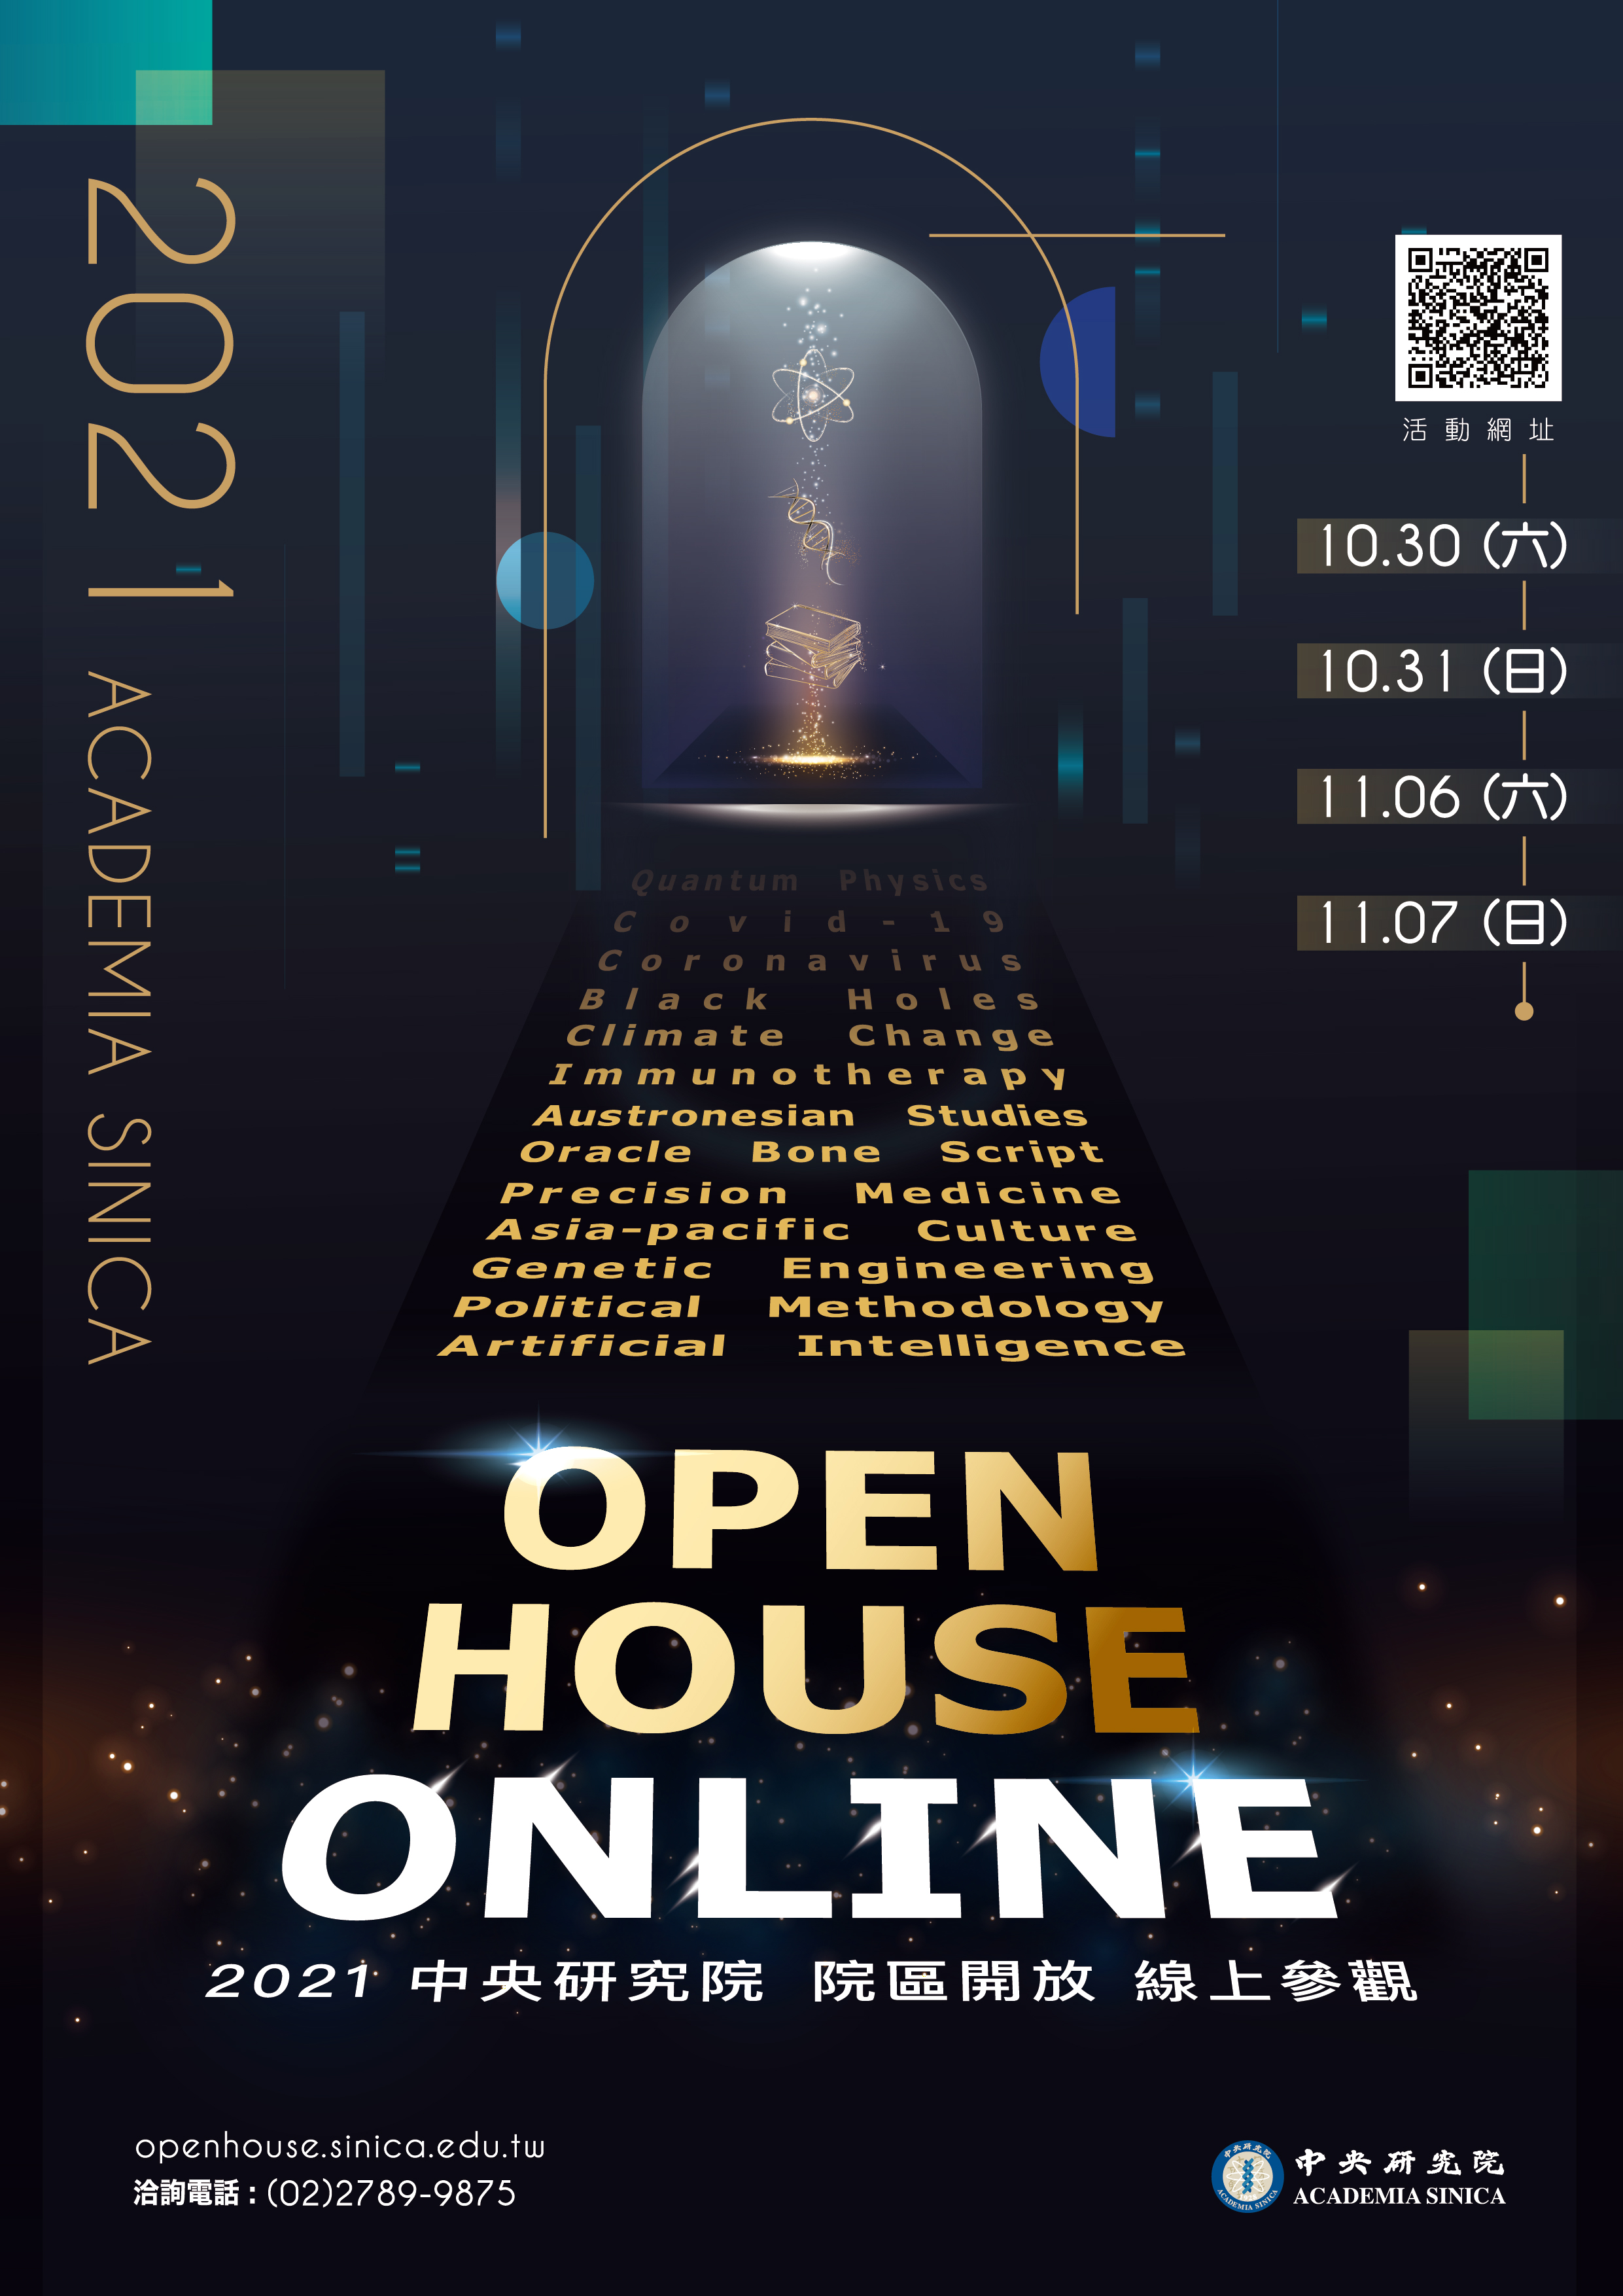 Academia Sinica’s First Online Open House!